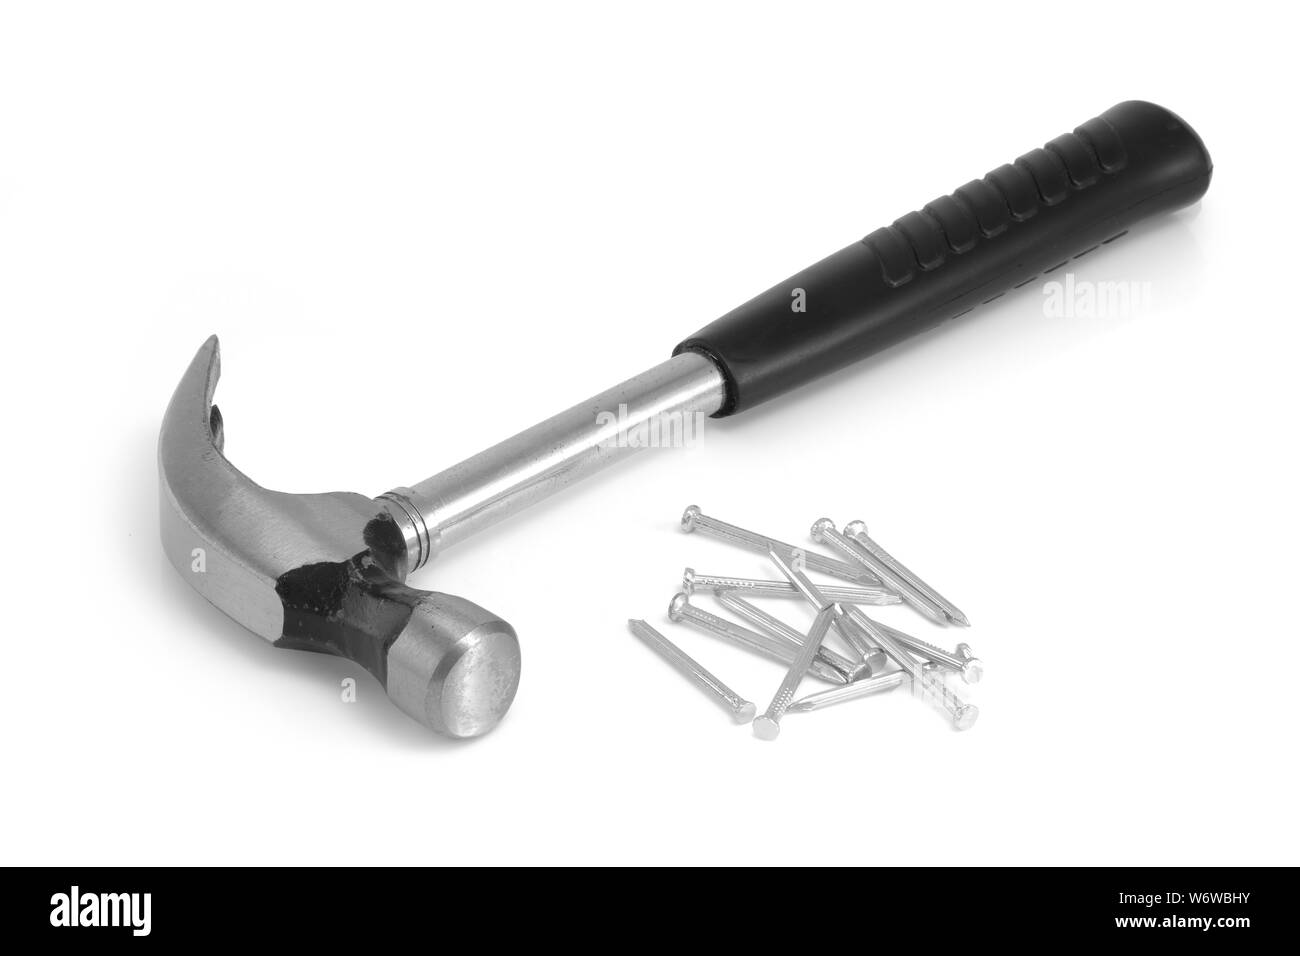 Claw hammer and nails on a white background Stock Photo